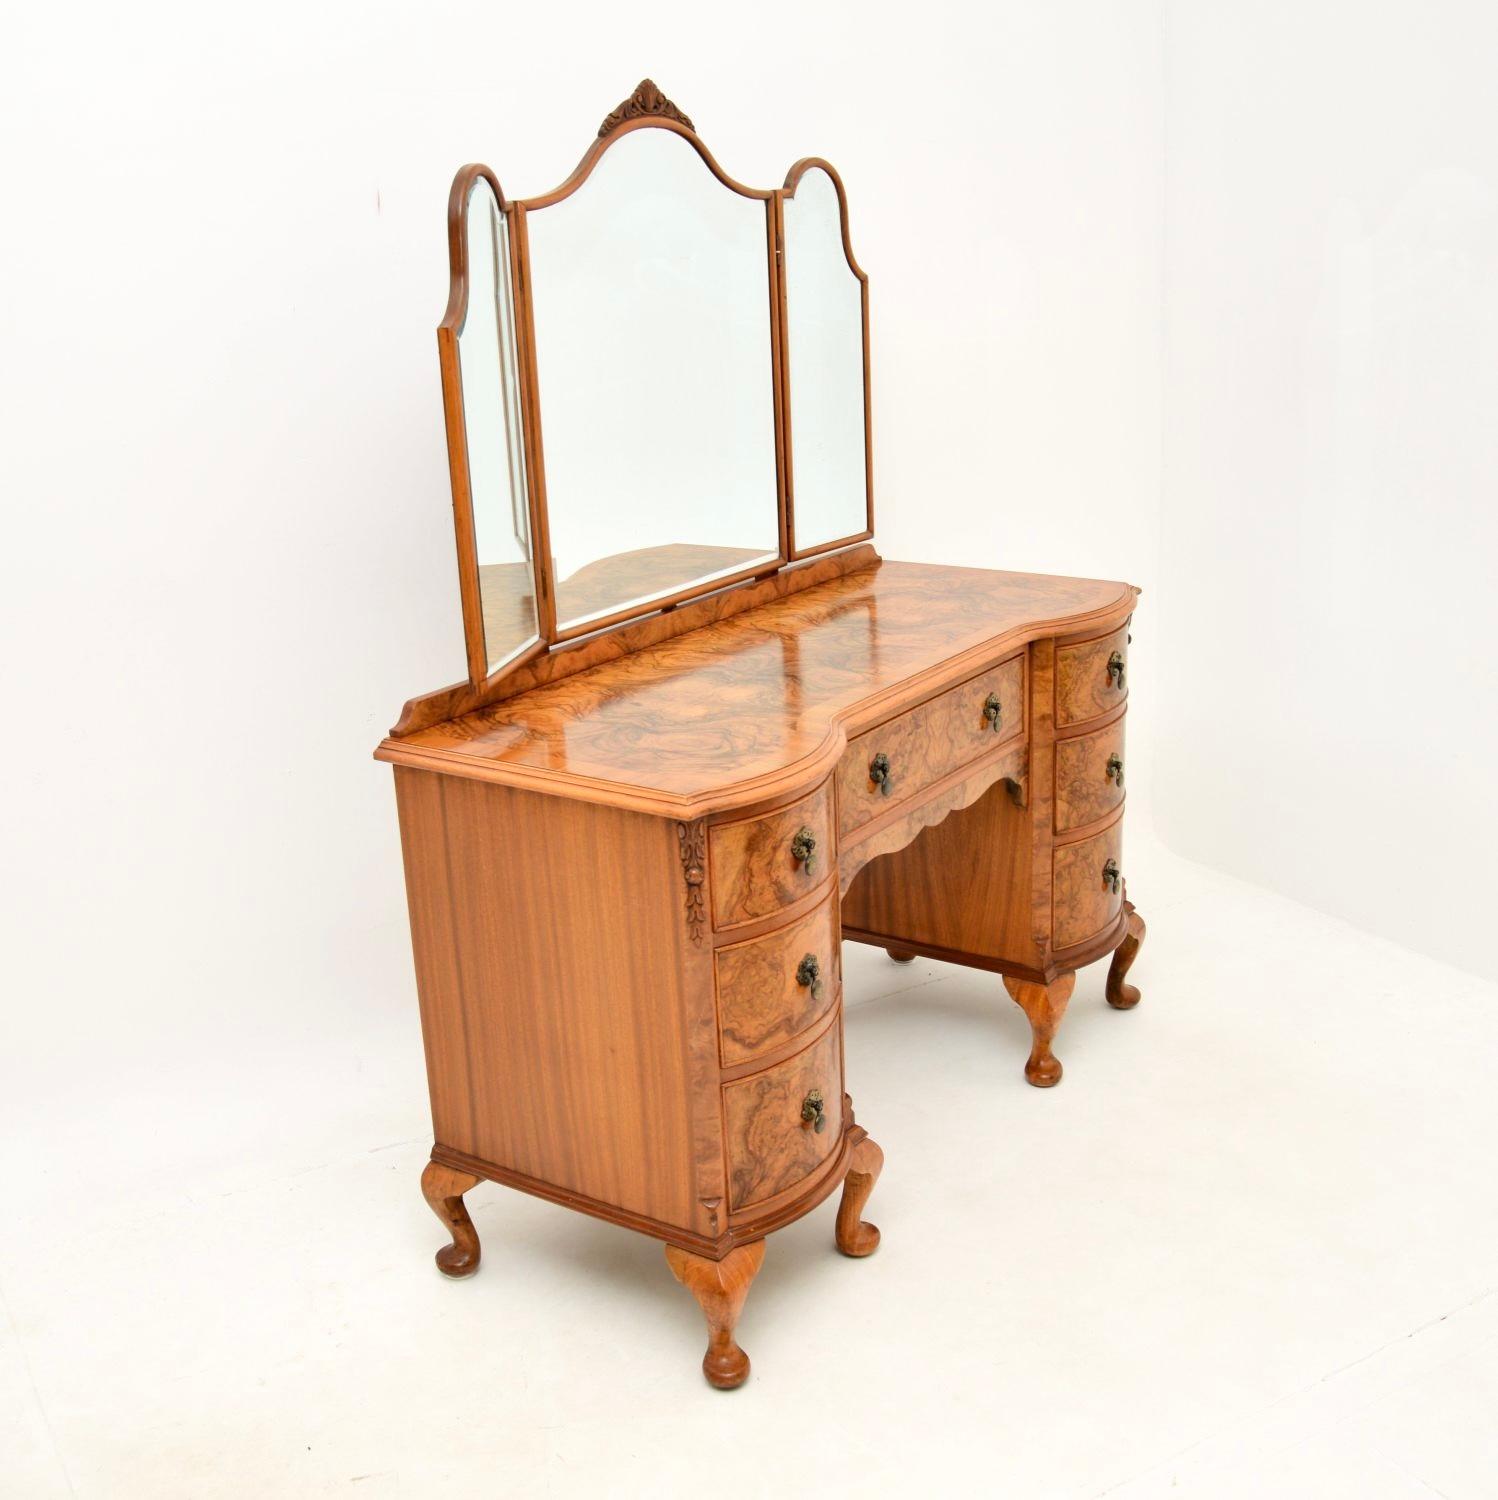 A stunning antique burr walnut dressing table in the Queen Anne style. This was made in England, it dates from around the 1930’s.

The quality is outstanding, this is extremely well made with lots of lovely features. The burr walnut grain patterns